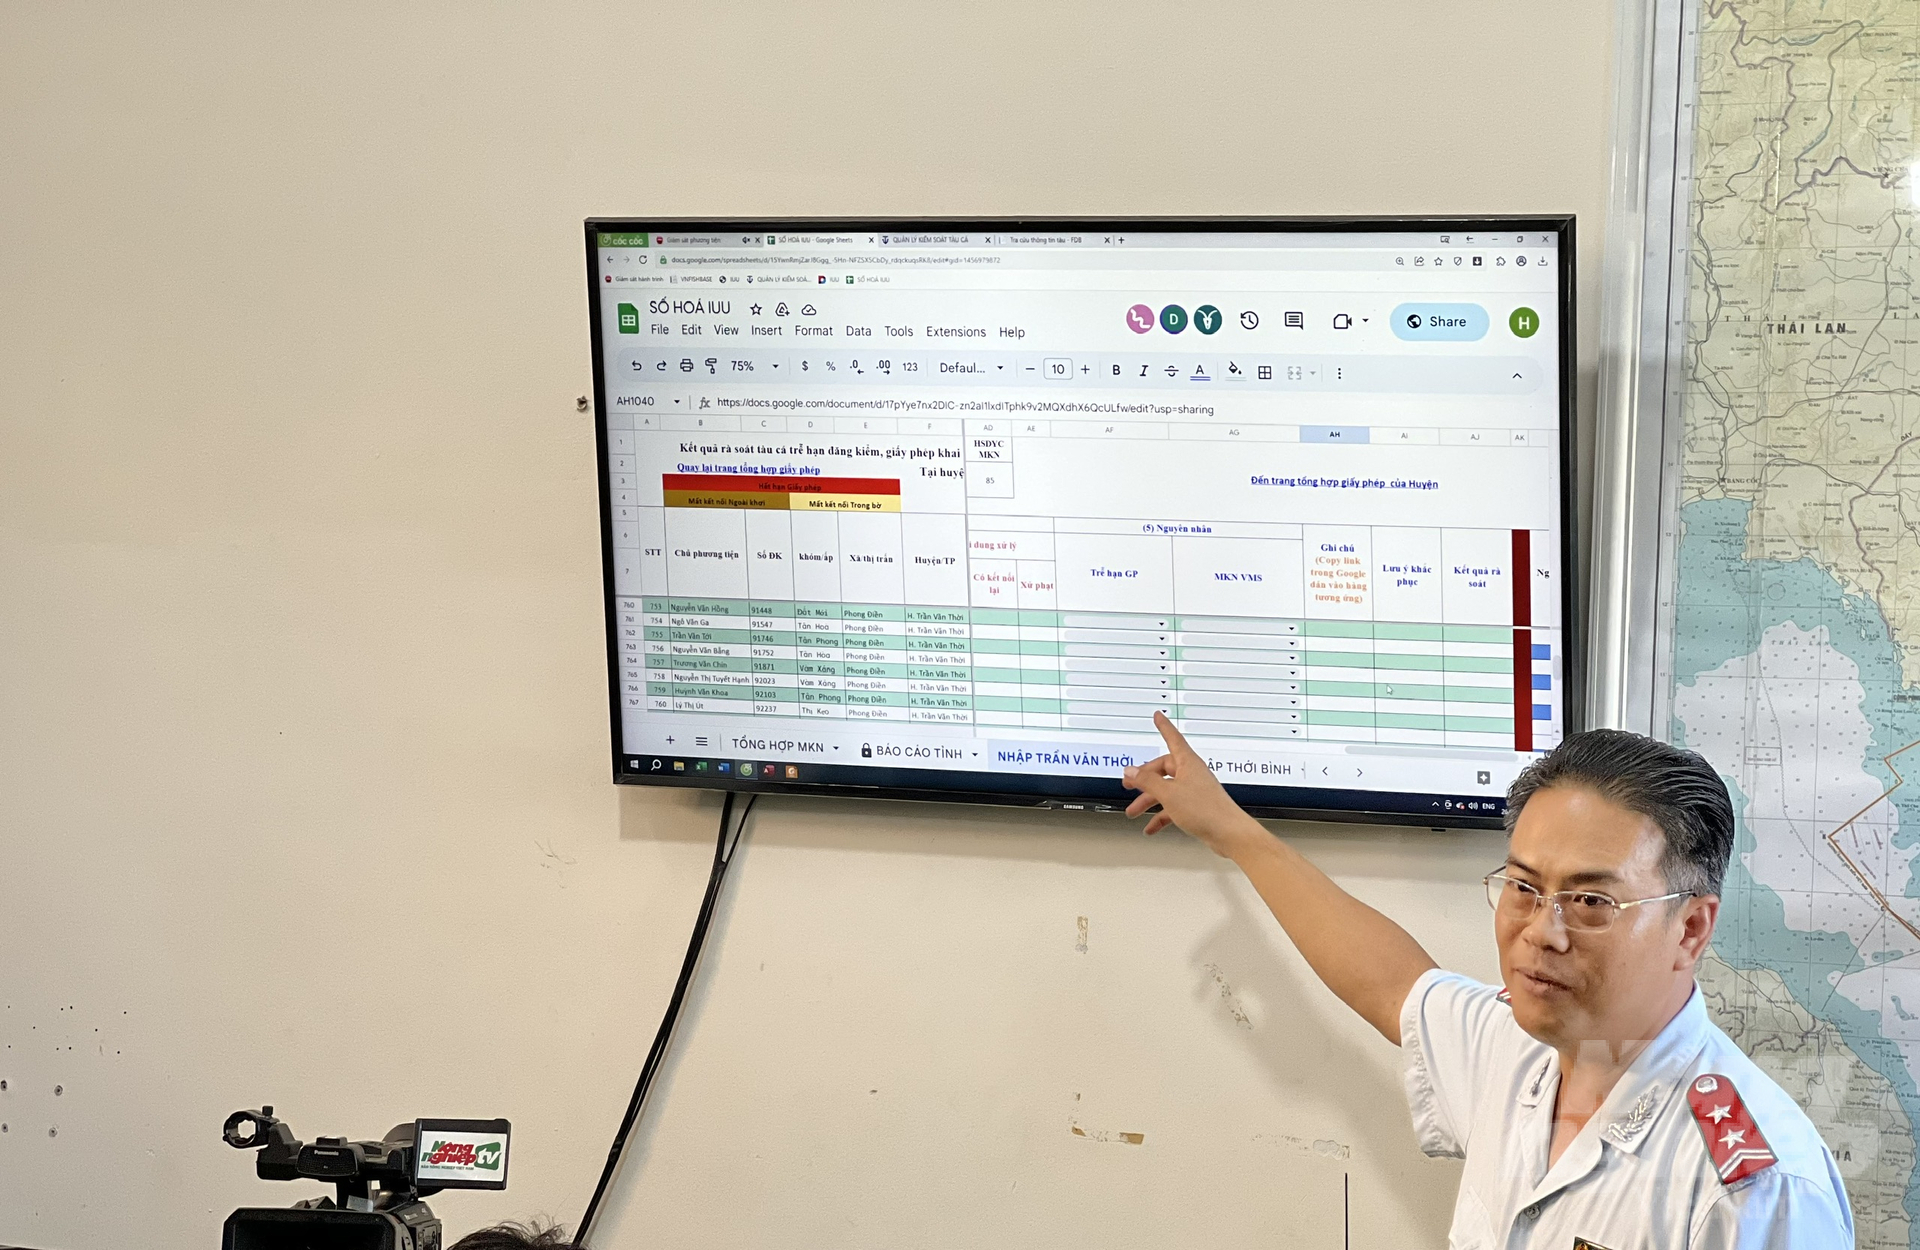 Mr Nguyen Viet Trieu, Deputy Director of the Fisheries Sub-Department of Ca Mau province, instructs the management of fishing vessels by information technology at Song Doc Fishing Port (Tran Van Thoi). Photo: Trong Linh.